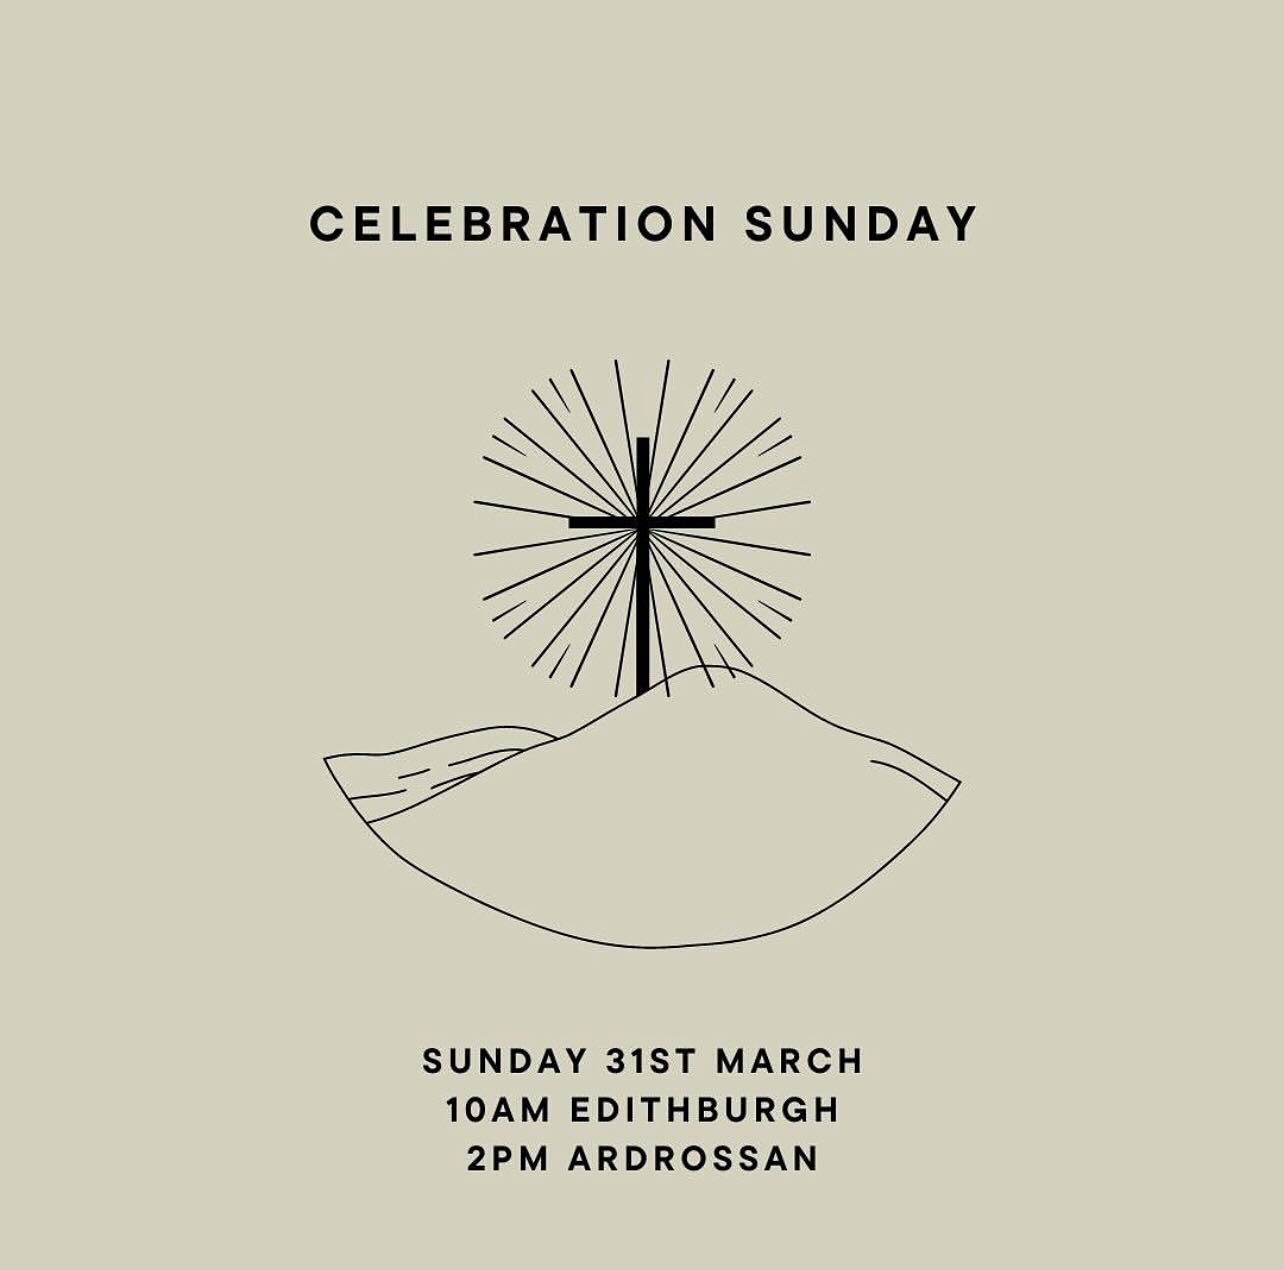 All are welcome to join us at Edithburgh 10am on Easter Sunday at Light Church as we celebrate the resurrection of Jesus.
Includes an Easter egg hunt for the kids. 👌🏼